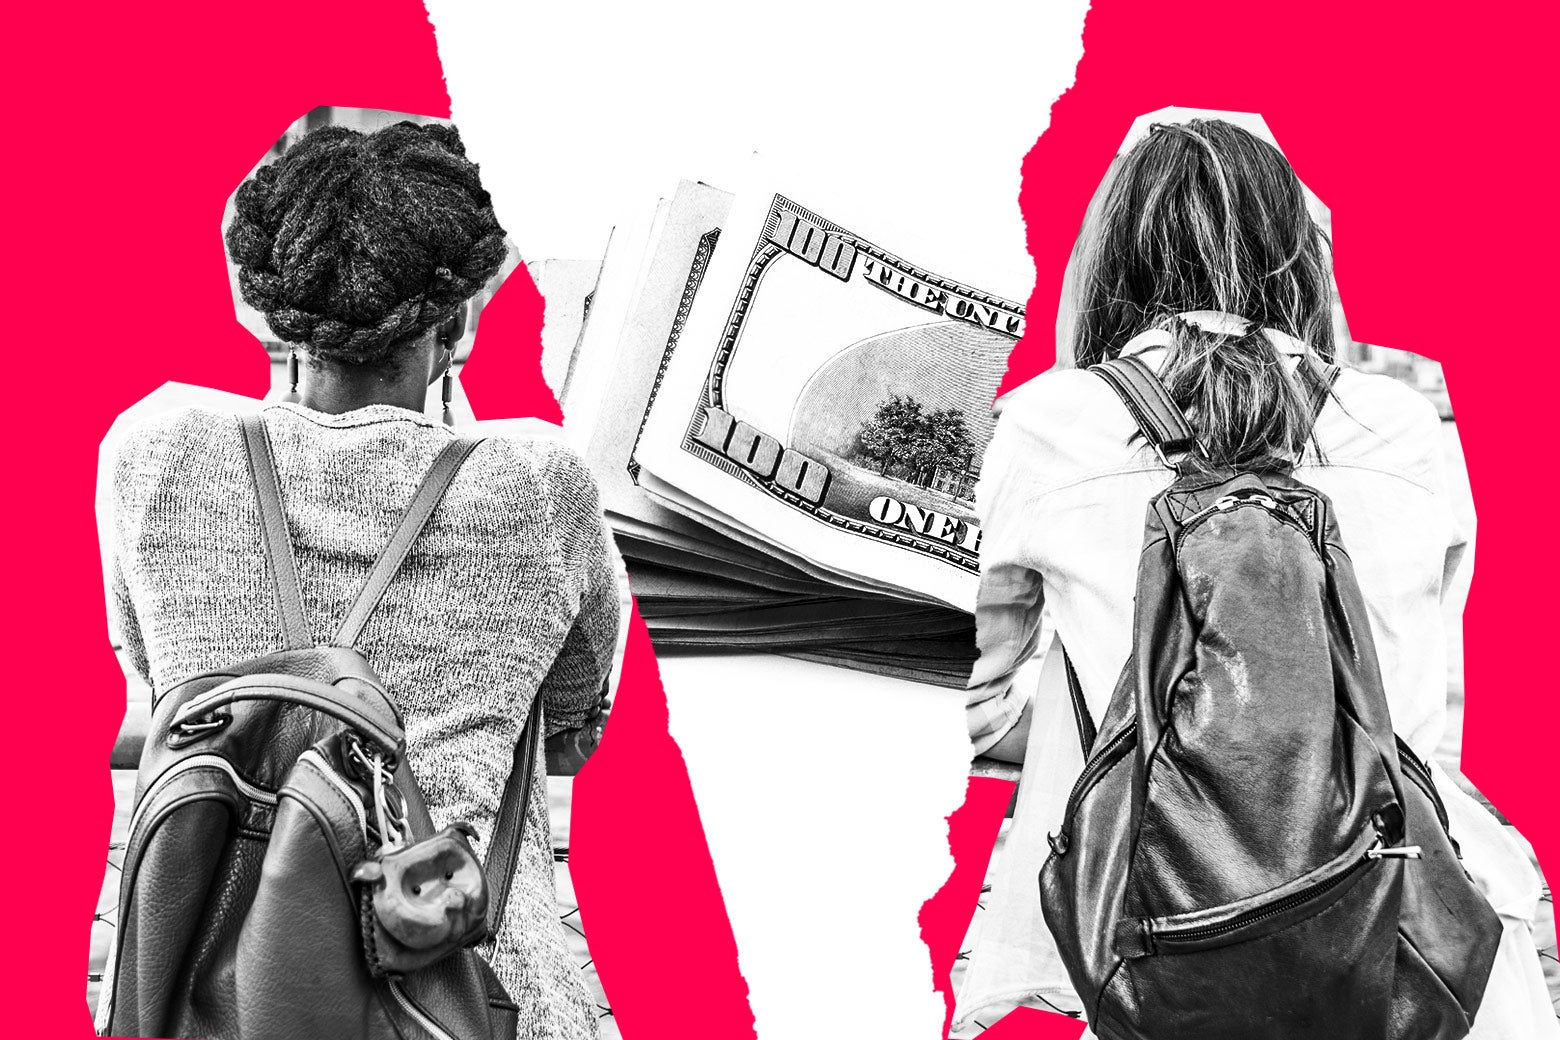 Two young adult women wearing backpacks, backs turned to camera, separated by a stack of money.